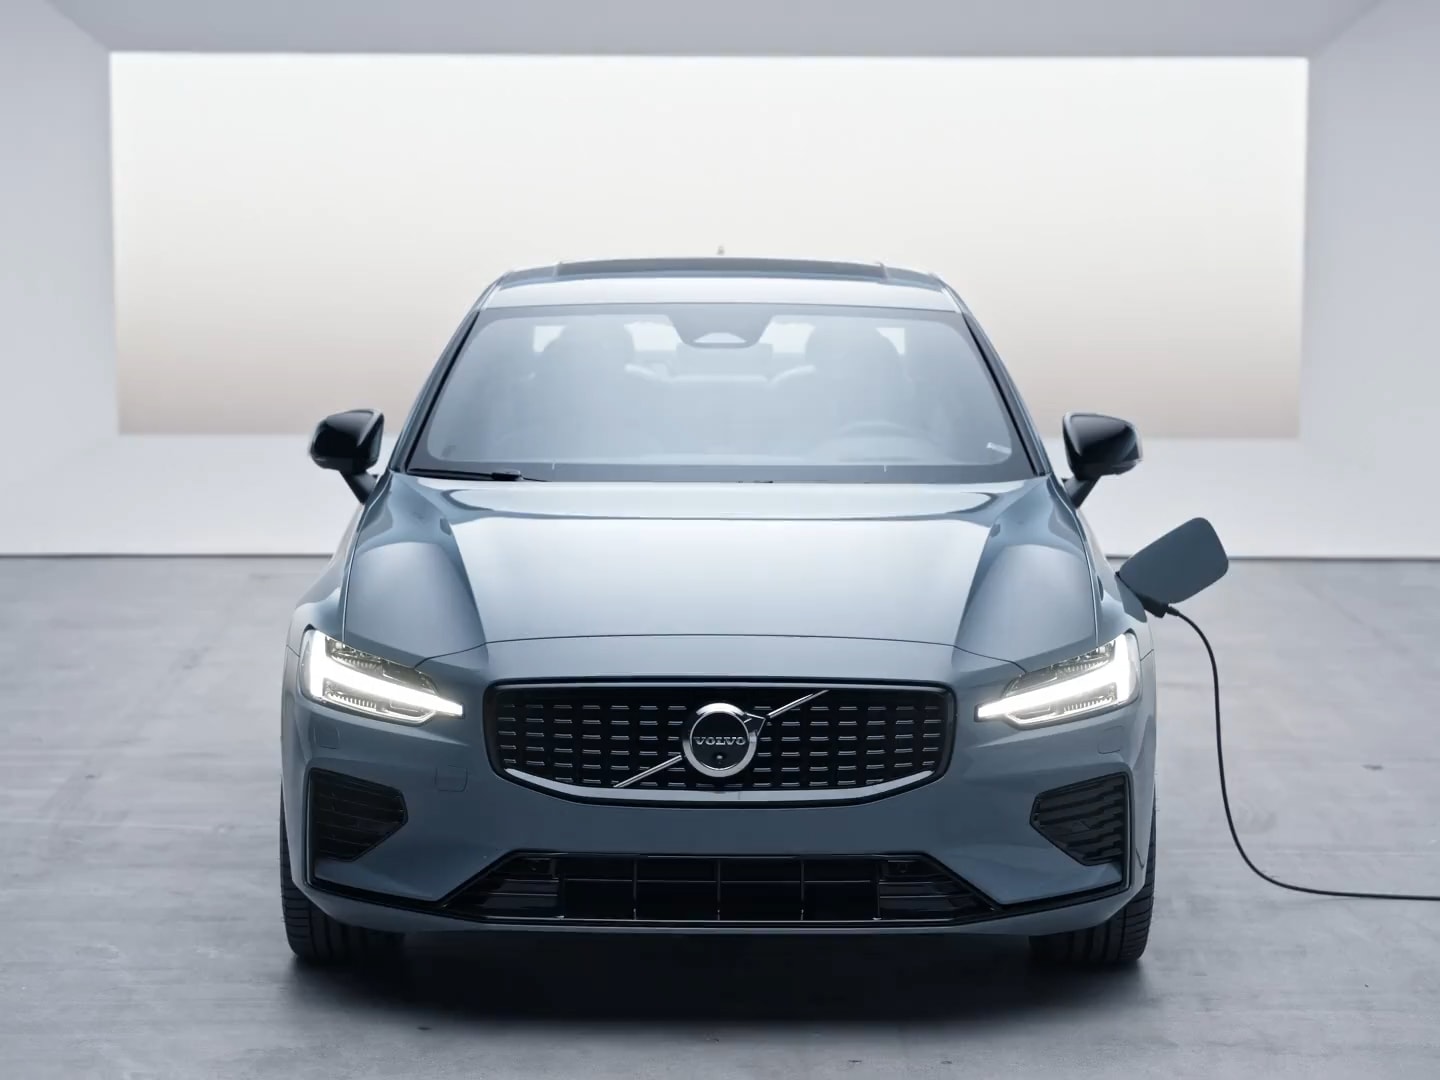 Exterior front of the Volvo S60 Recharge plug-in hybrid.